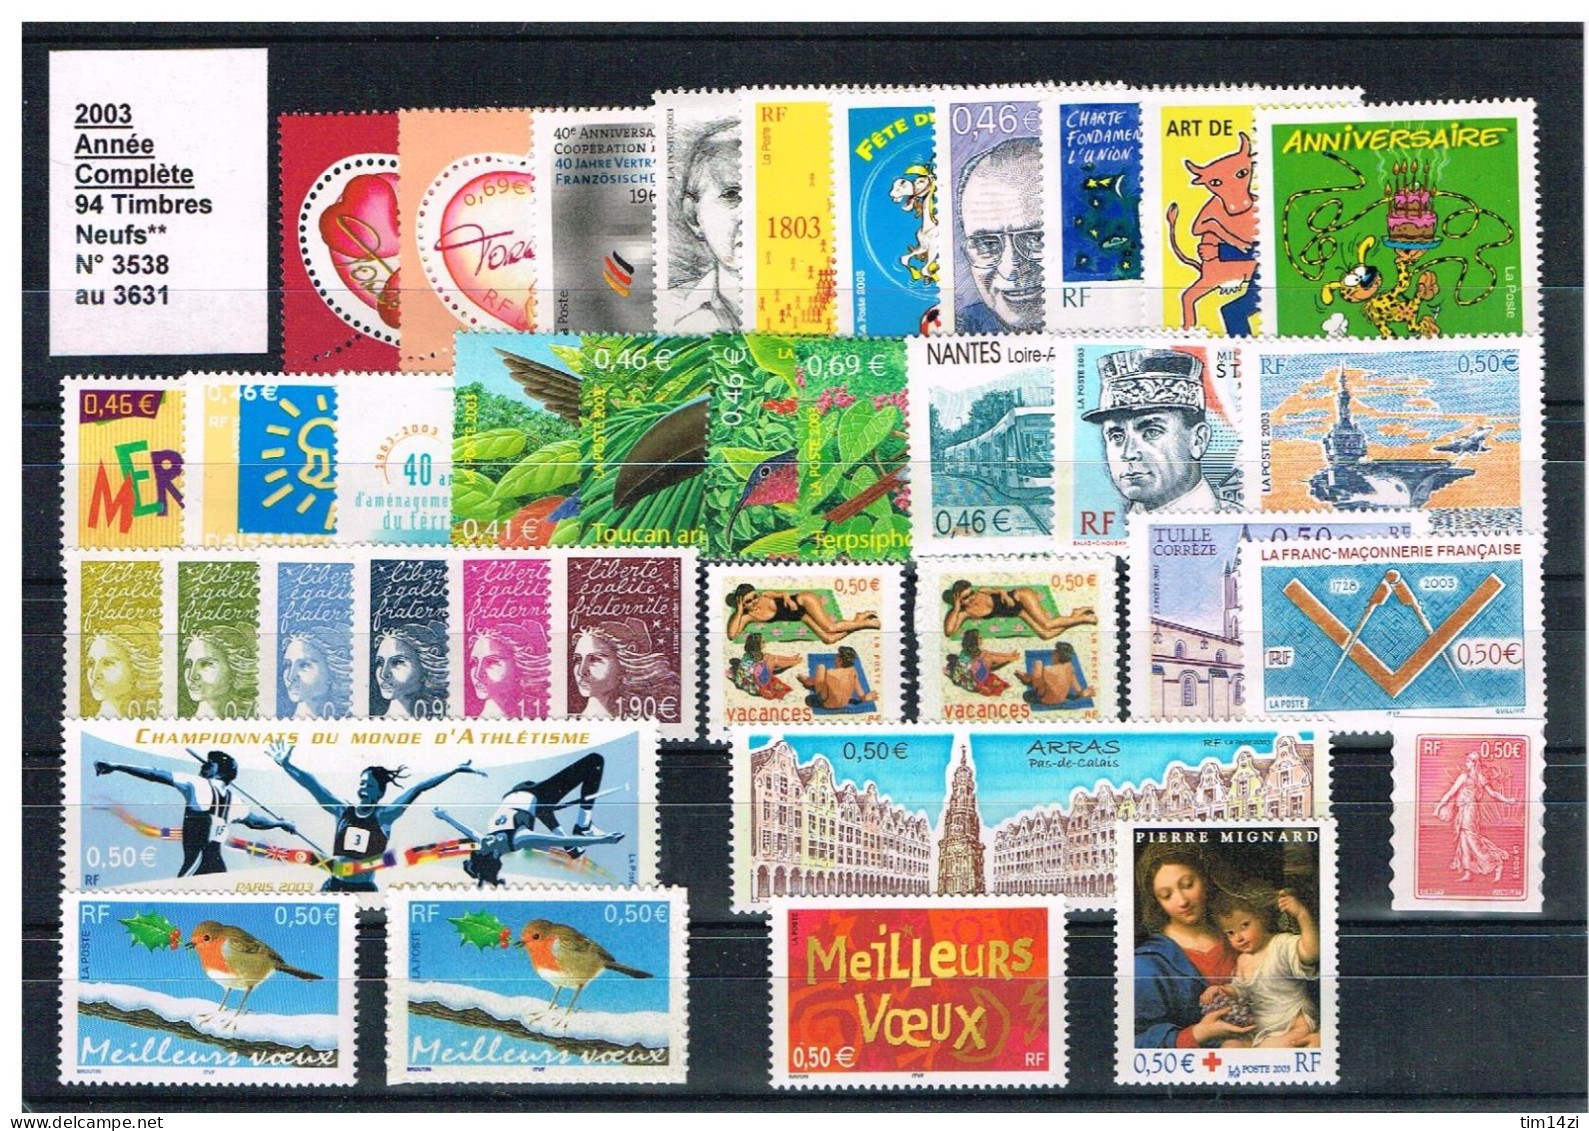 FRANCE - ANNEE 2003 COMPLETE - NEUF LUXE**  SUPERBE - 94 Timbres - Y & T - COTE : 169,00 Euros - 2000-2009